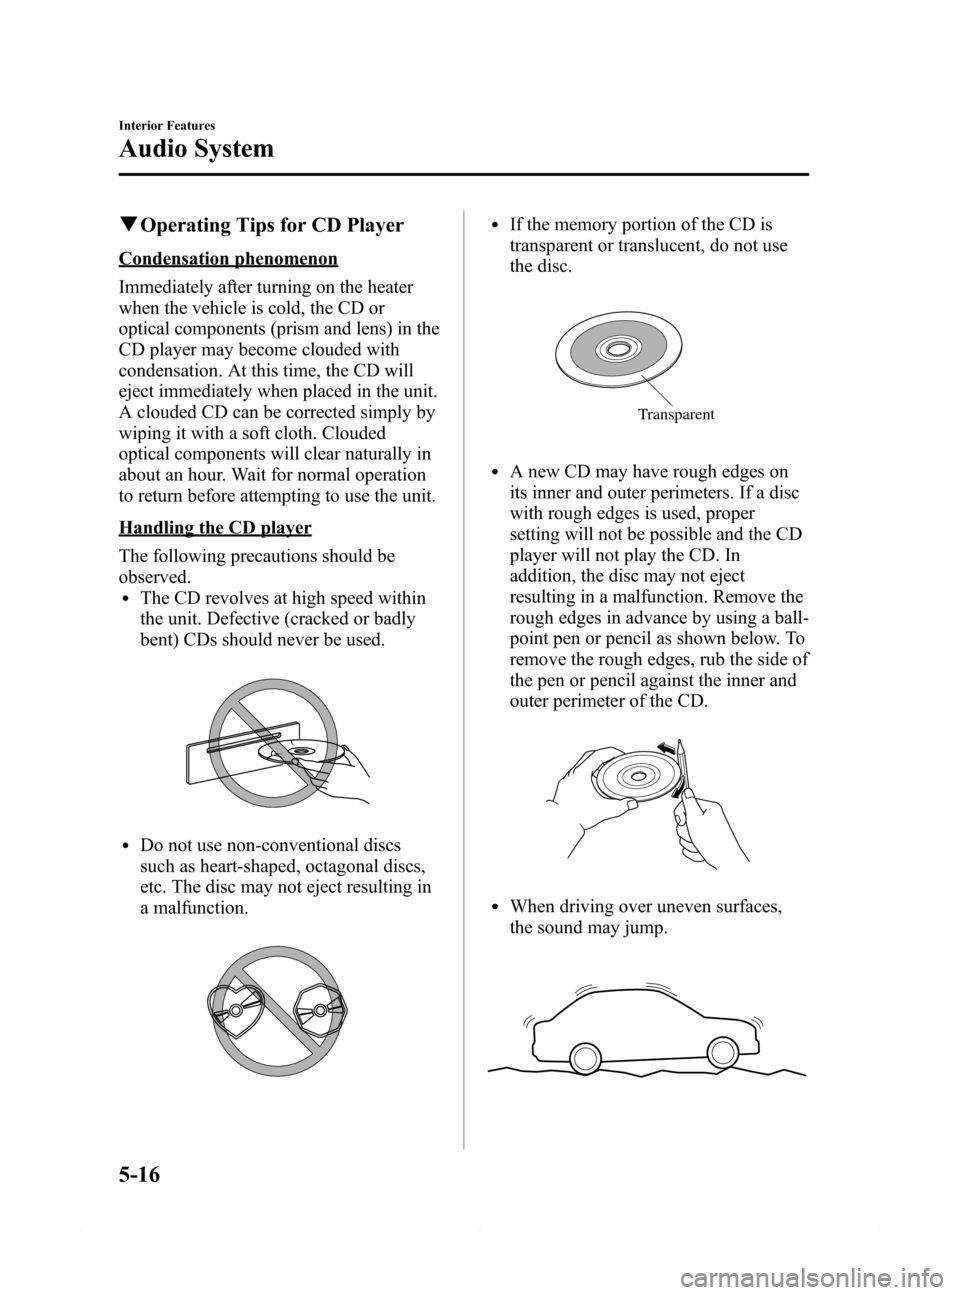 MAZDA MODEL 6 2015  Owners Manual (in English) Black plate (288,1)
qOperating Tips for CD Player
Condensation phenomenon
Immediately after turning on the heater
when the vehicle is cold, the CD or
optical components (prism and lens) in the
CD play